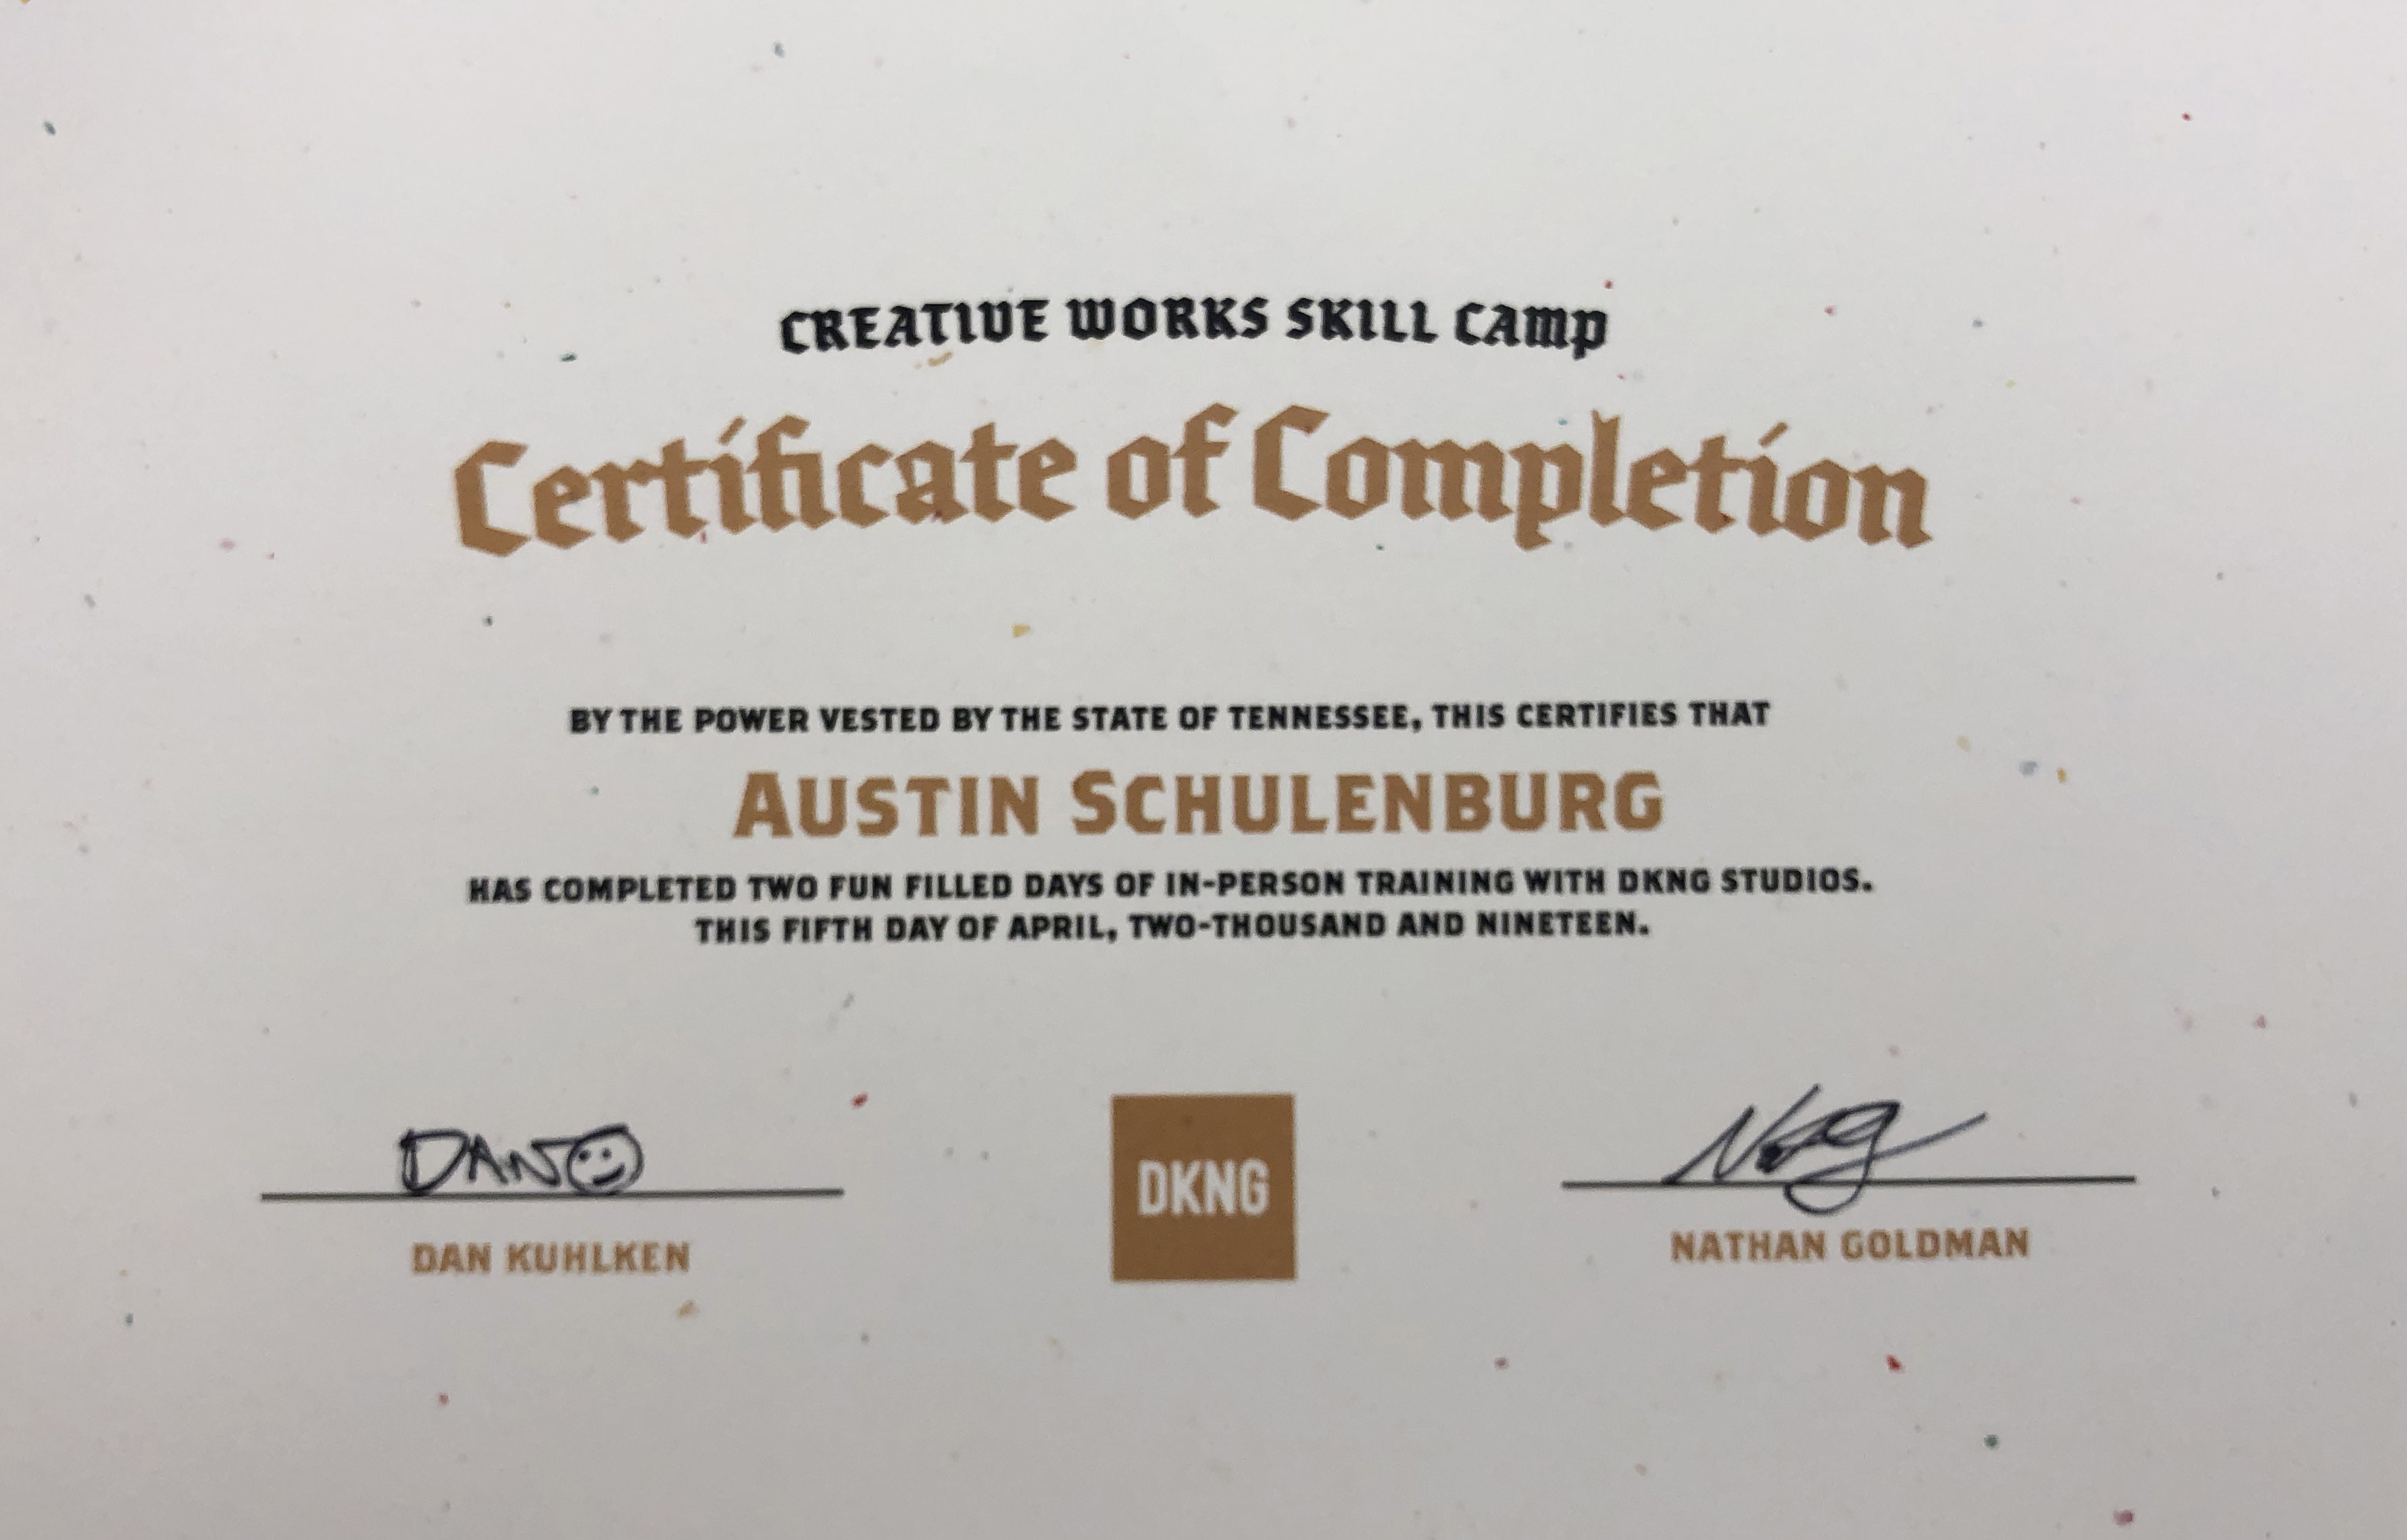 Austin's Creative Works Skills Camp Certificate of Completion, signed by Dan and Nathan